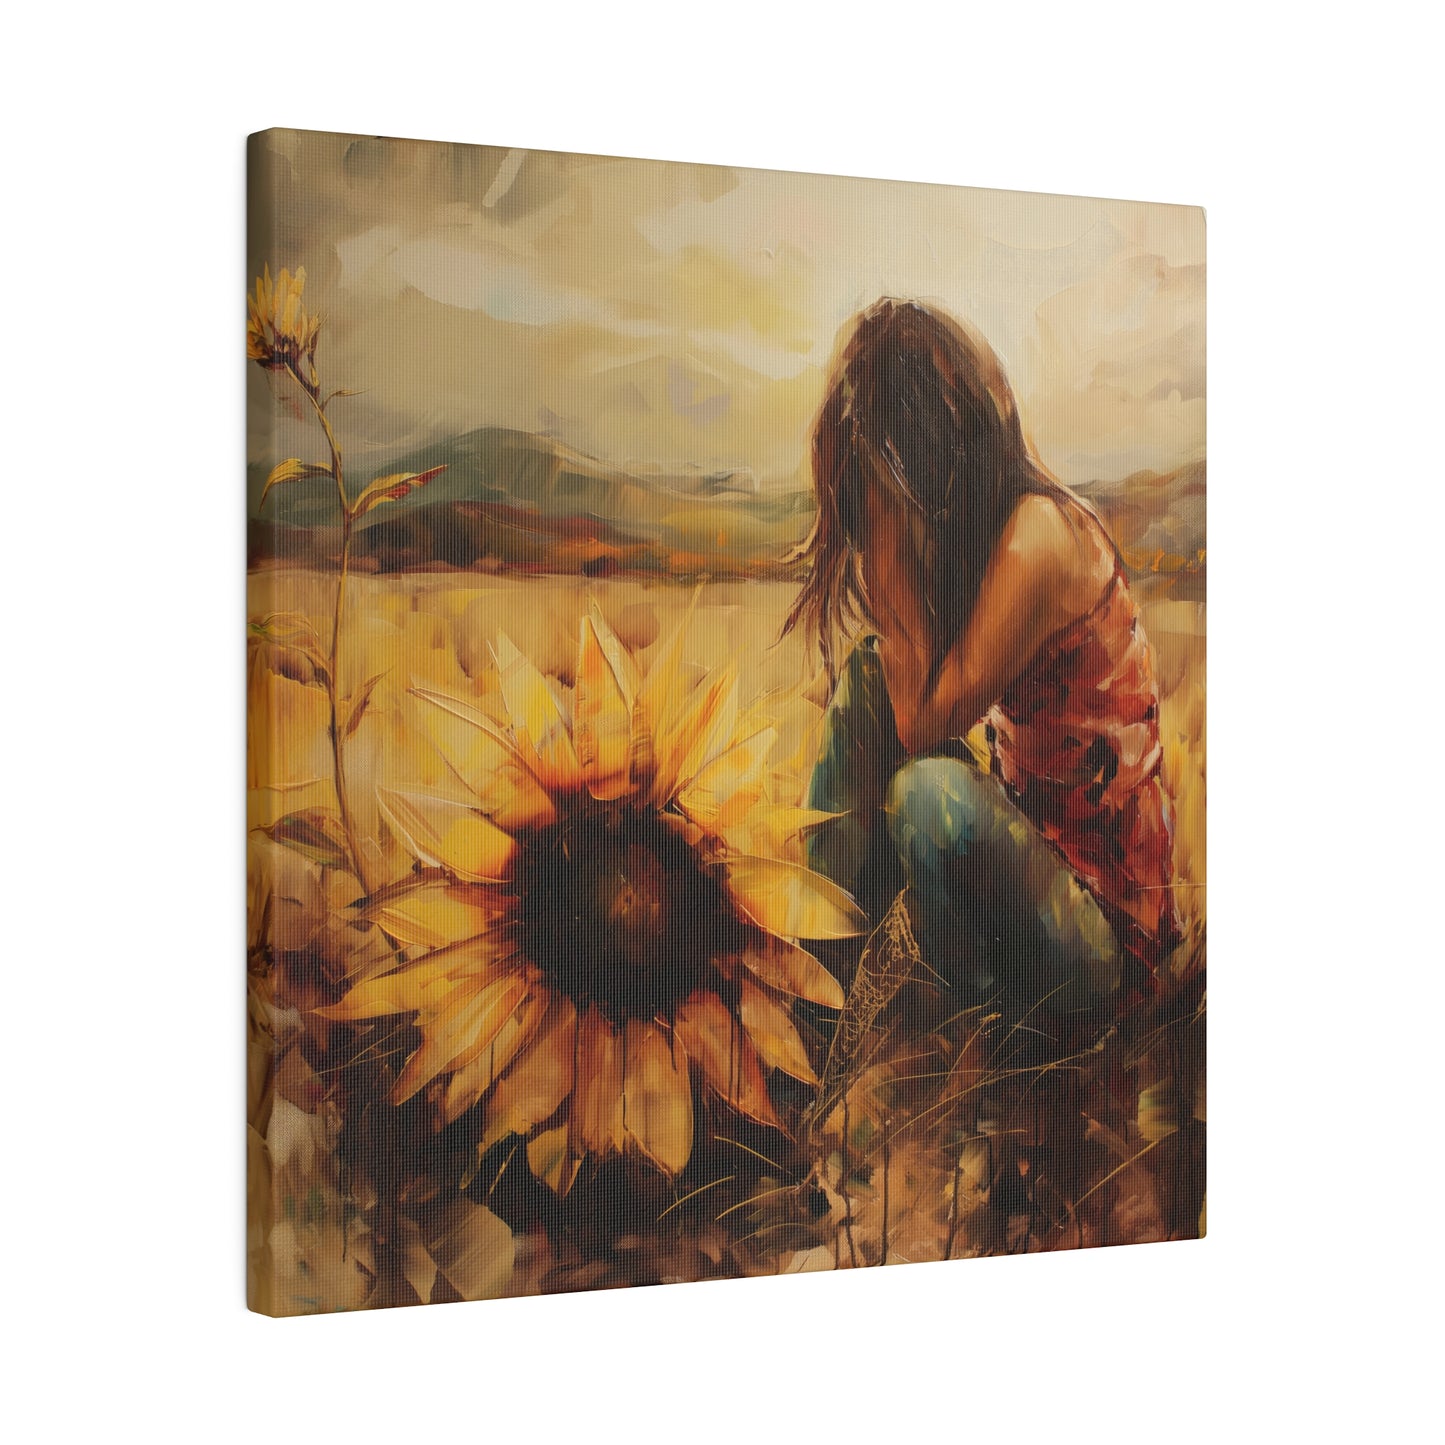 A Elena Duval: Solace in Solitude canvas print emotively depicting a woman sitting in a field of sunflowers, capturing the essence of human experience by Printify.